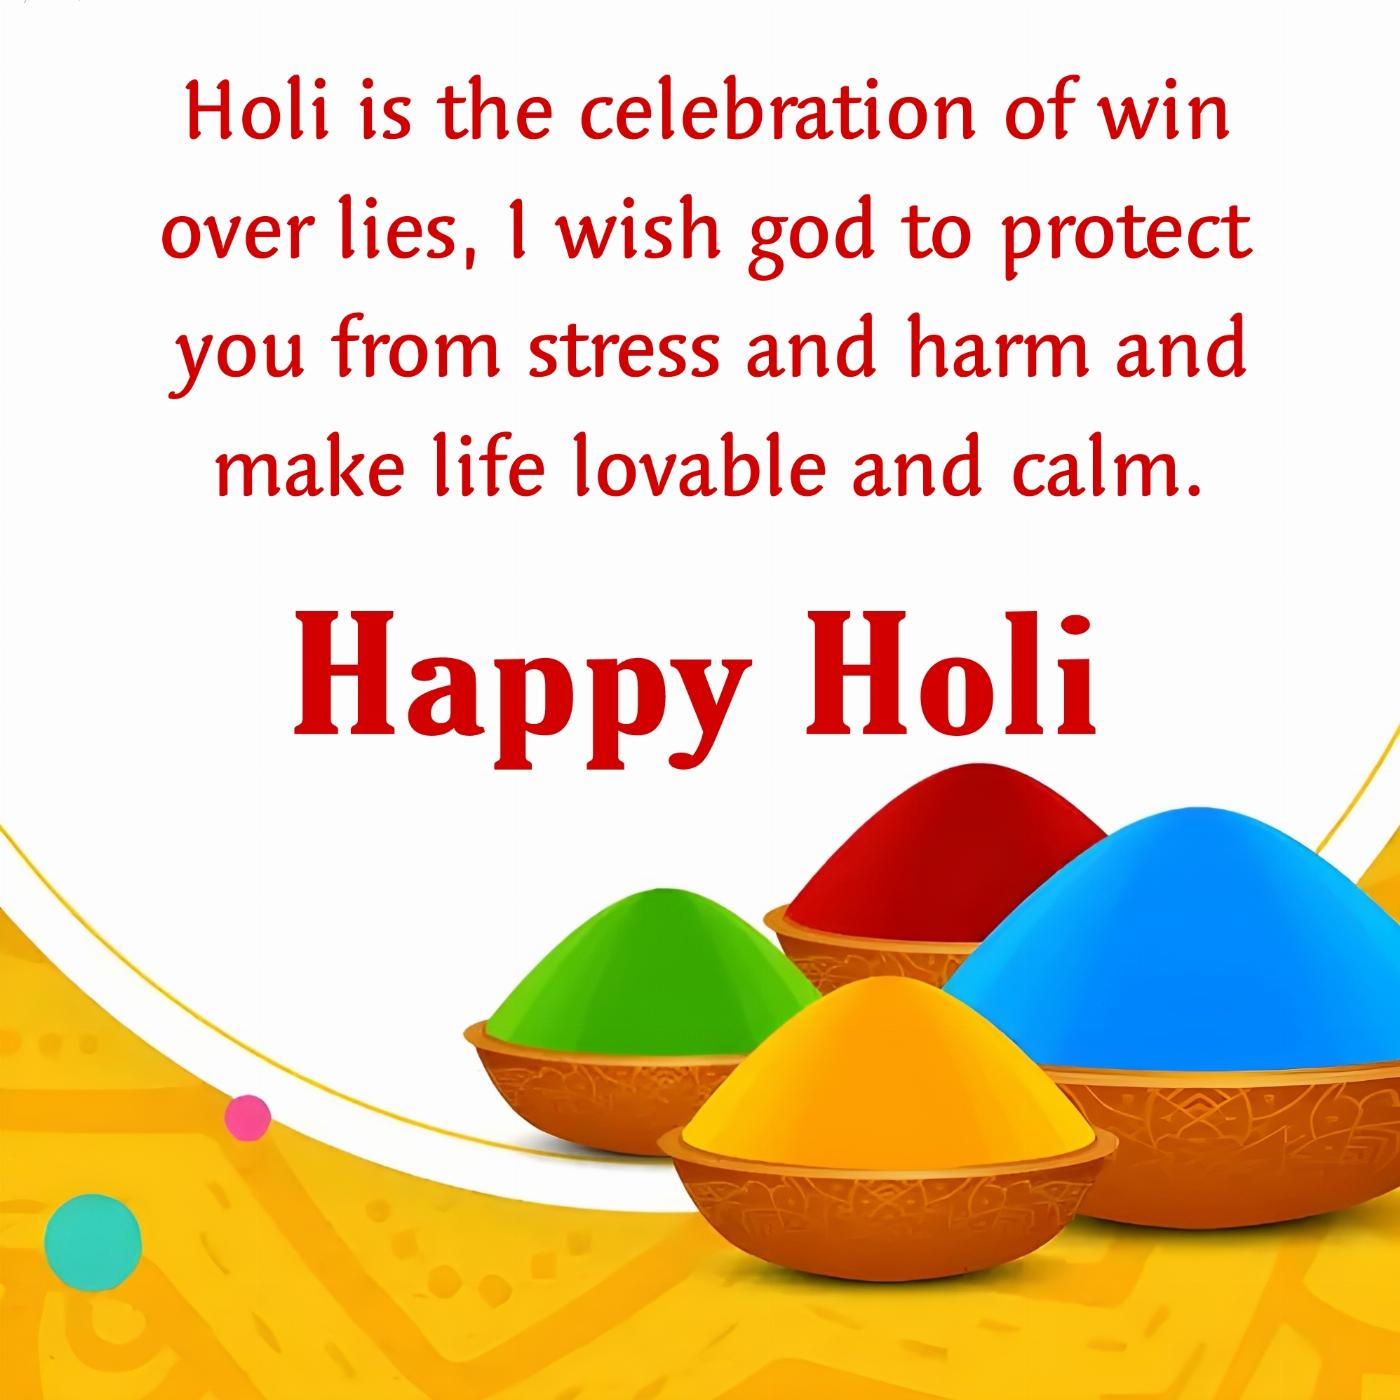 Holi is the celebration of win over lies